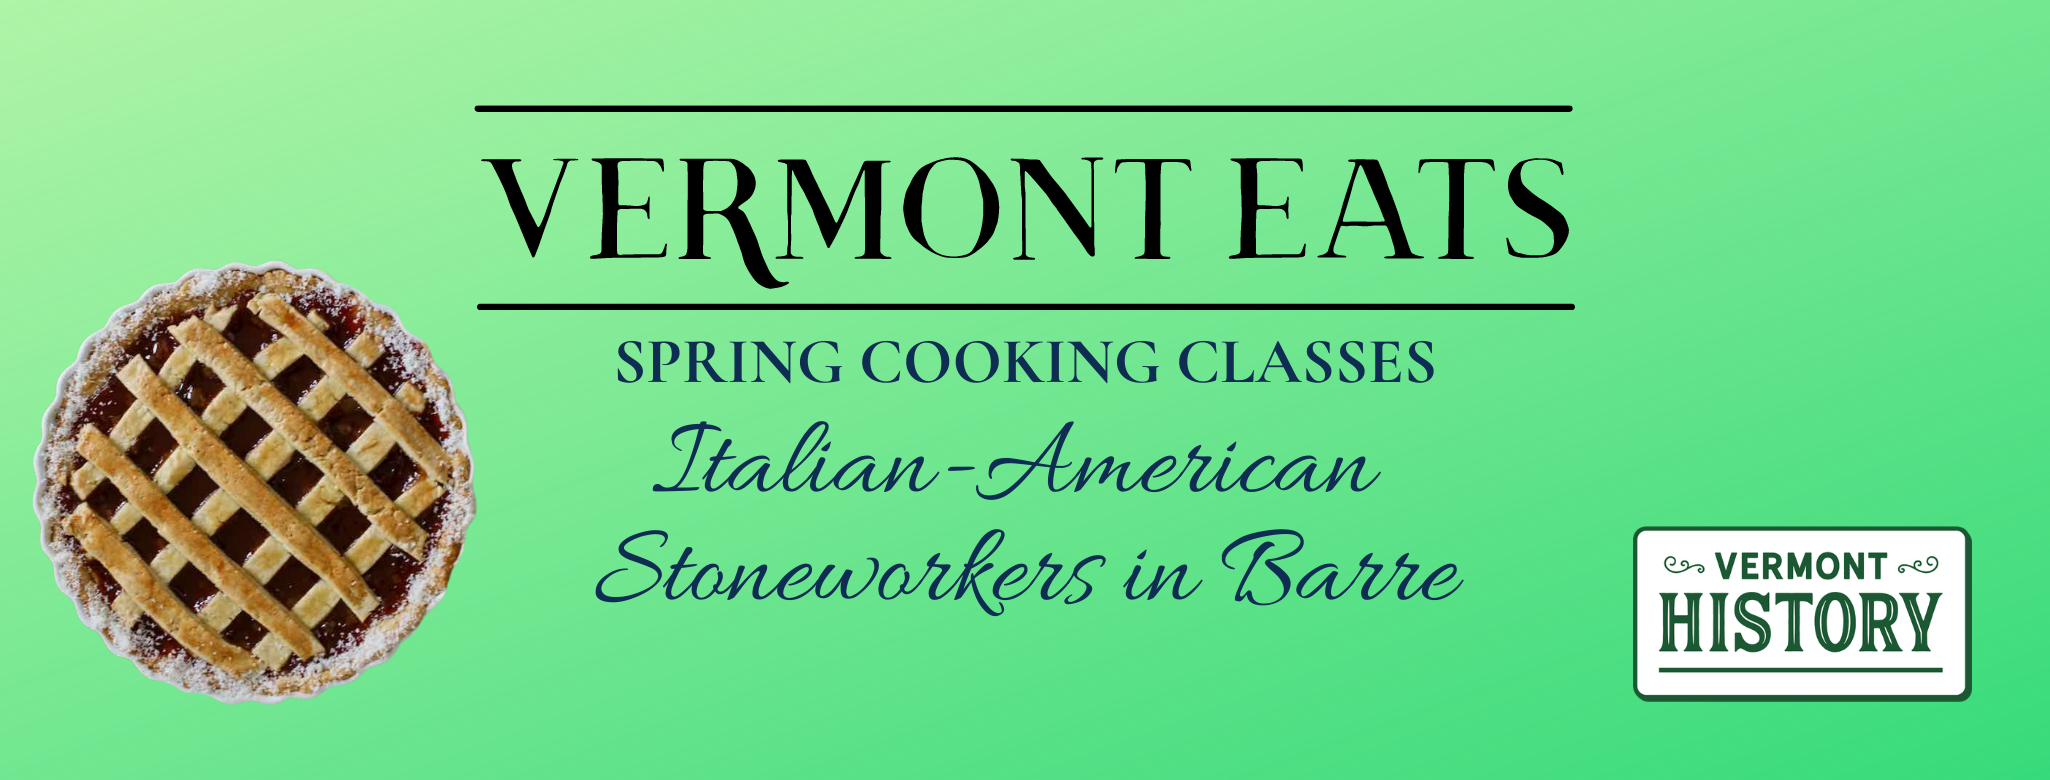 Vermont Eats Spring Cooking Classes. Italian American.